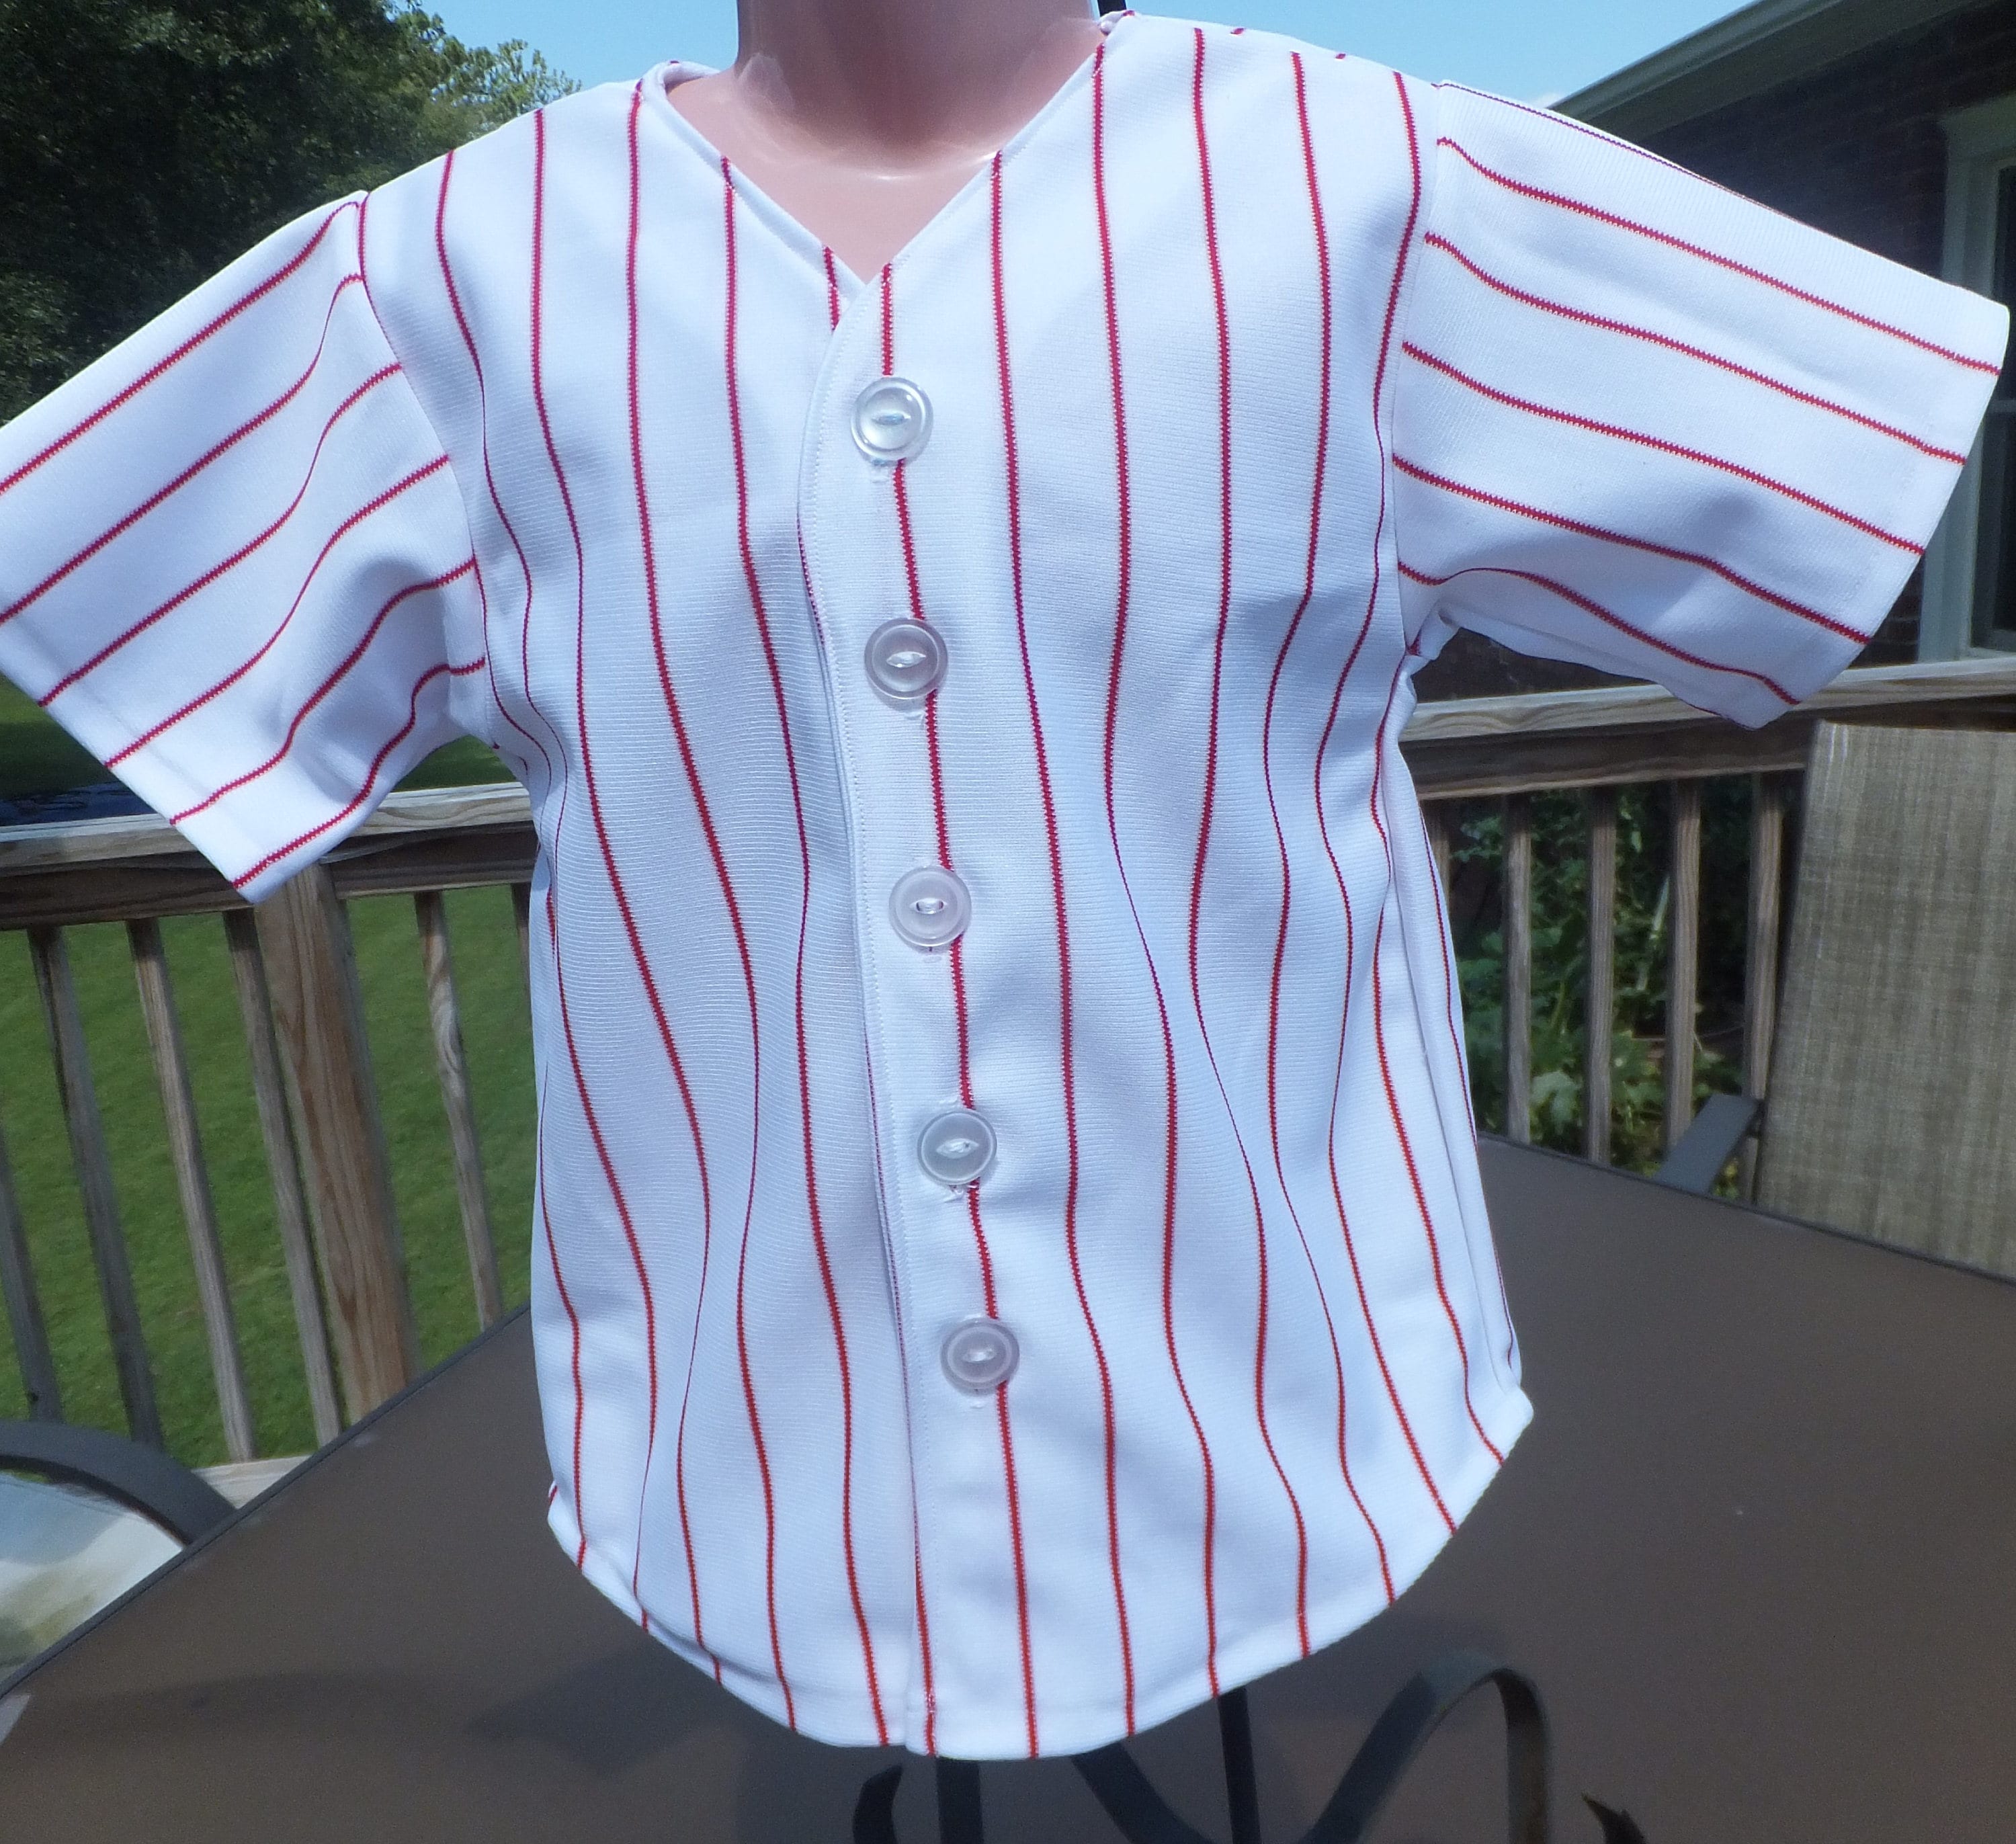 Red and white Pinstripe knit Baseball Jersey for Infants. NB, 6, 12, 18  month sizes. Pinstripe, No Embroidery or Vinyl. Cake smash jersey